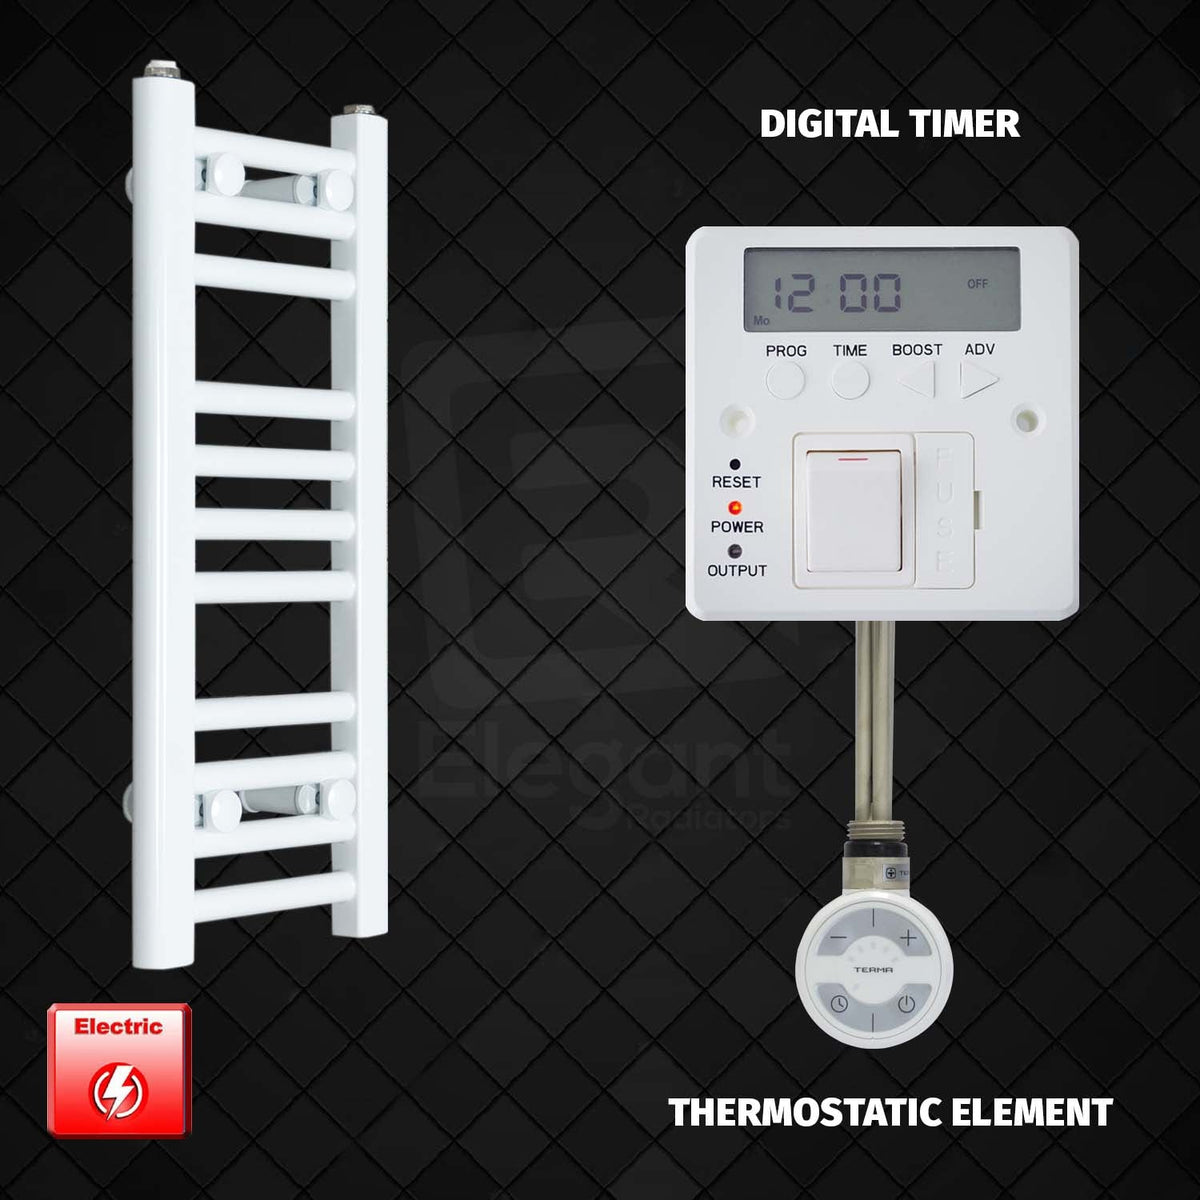 600 x 200 Pre-Filled Electric Heated Towel Radiator White HTR MOA Digital Timer Thermostatic Element